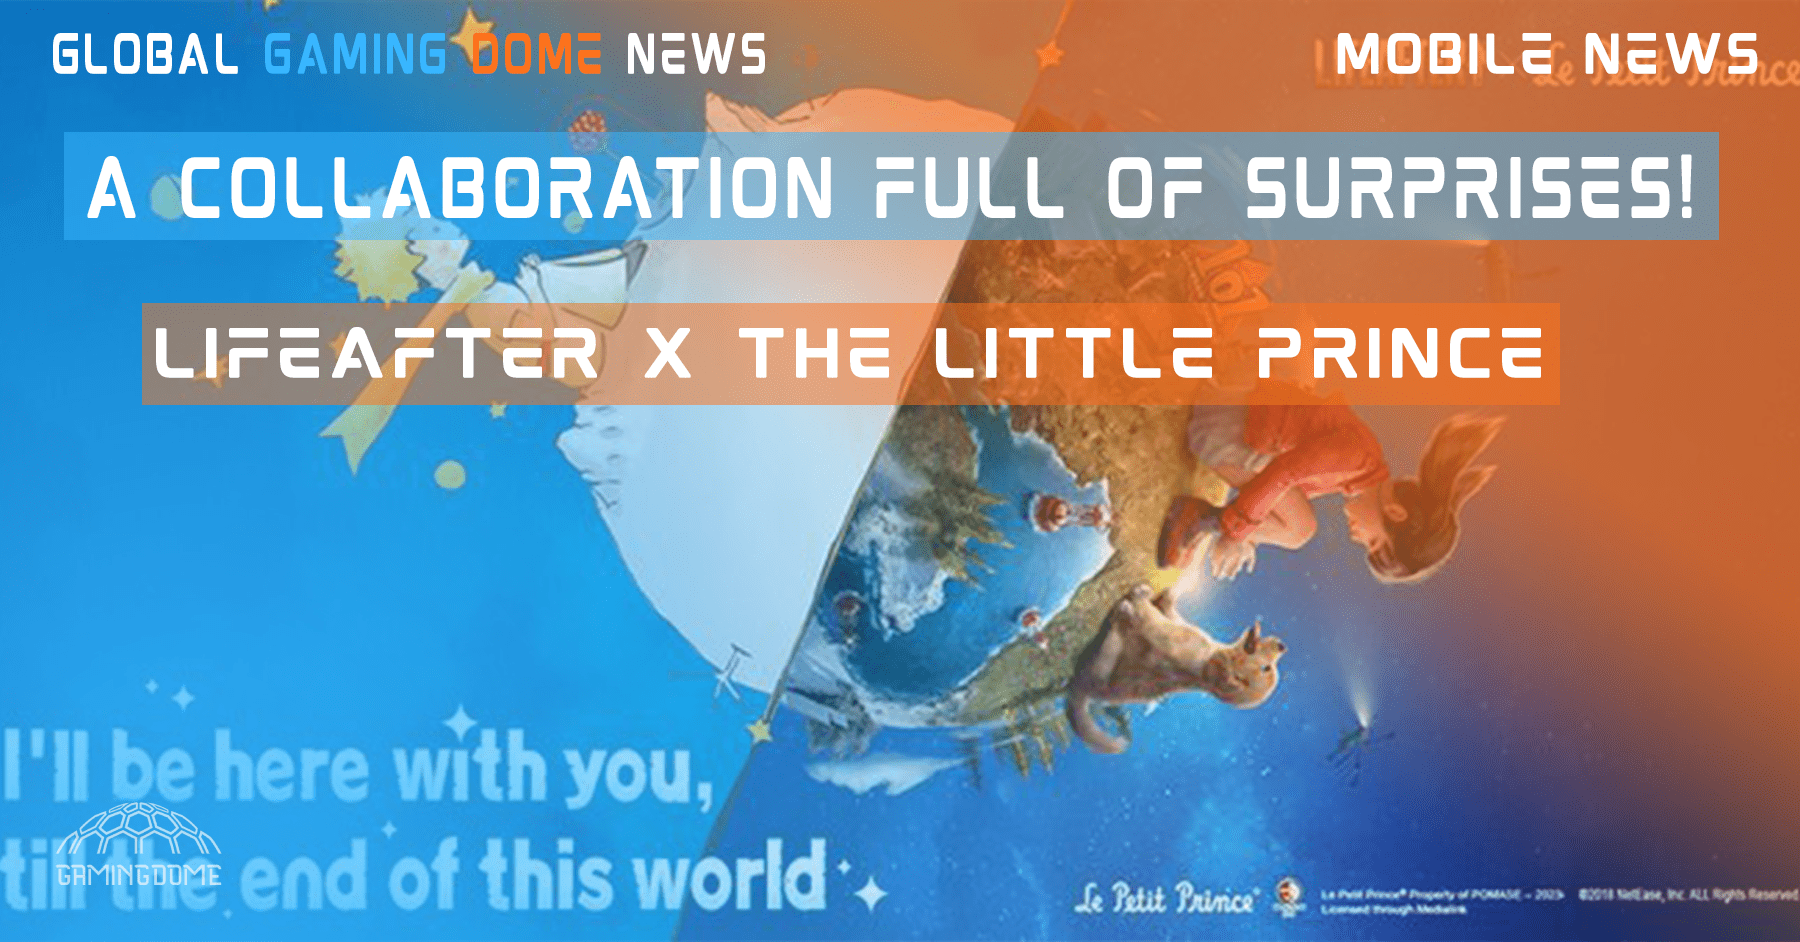 LIFEAFTER X THE LITTLE PRINCE: A COLLABORATION FULL OF SURPRISES!